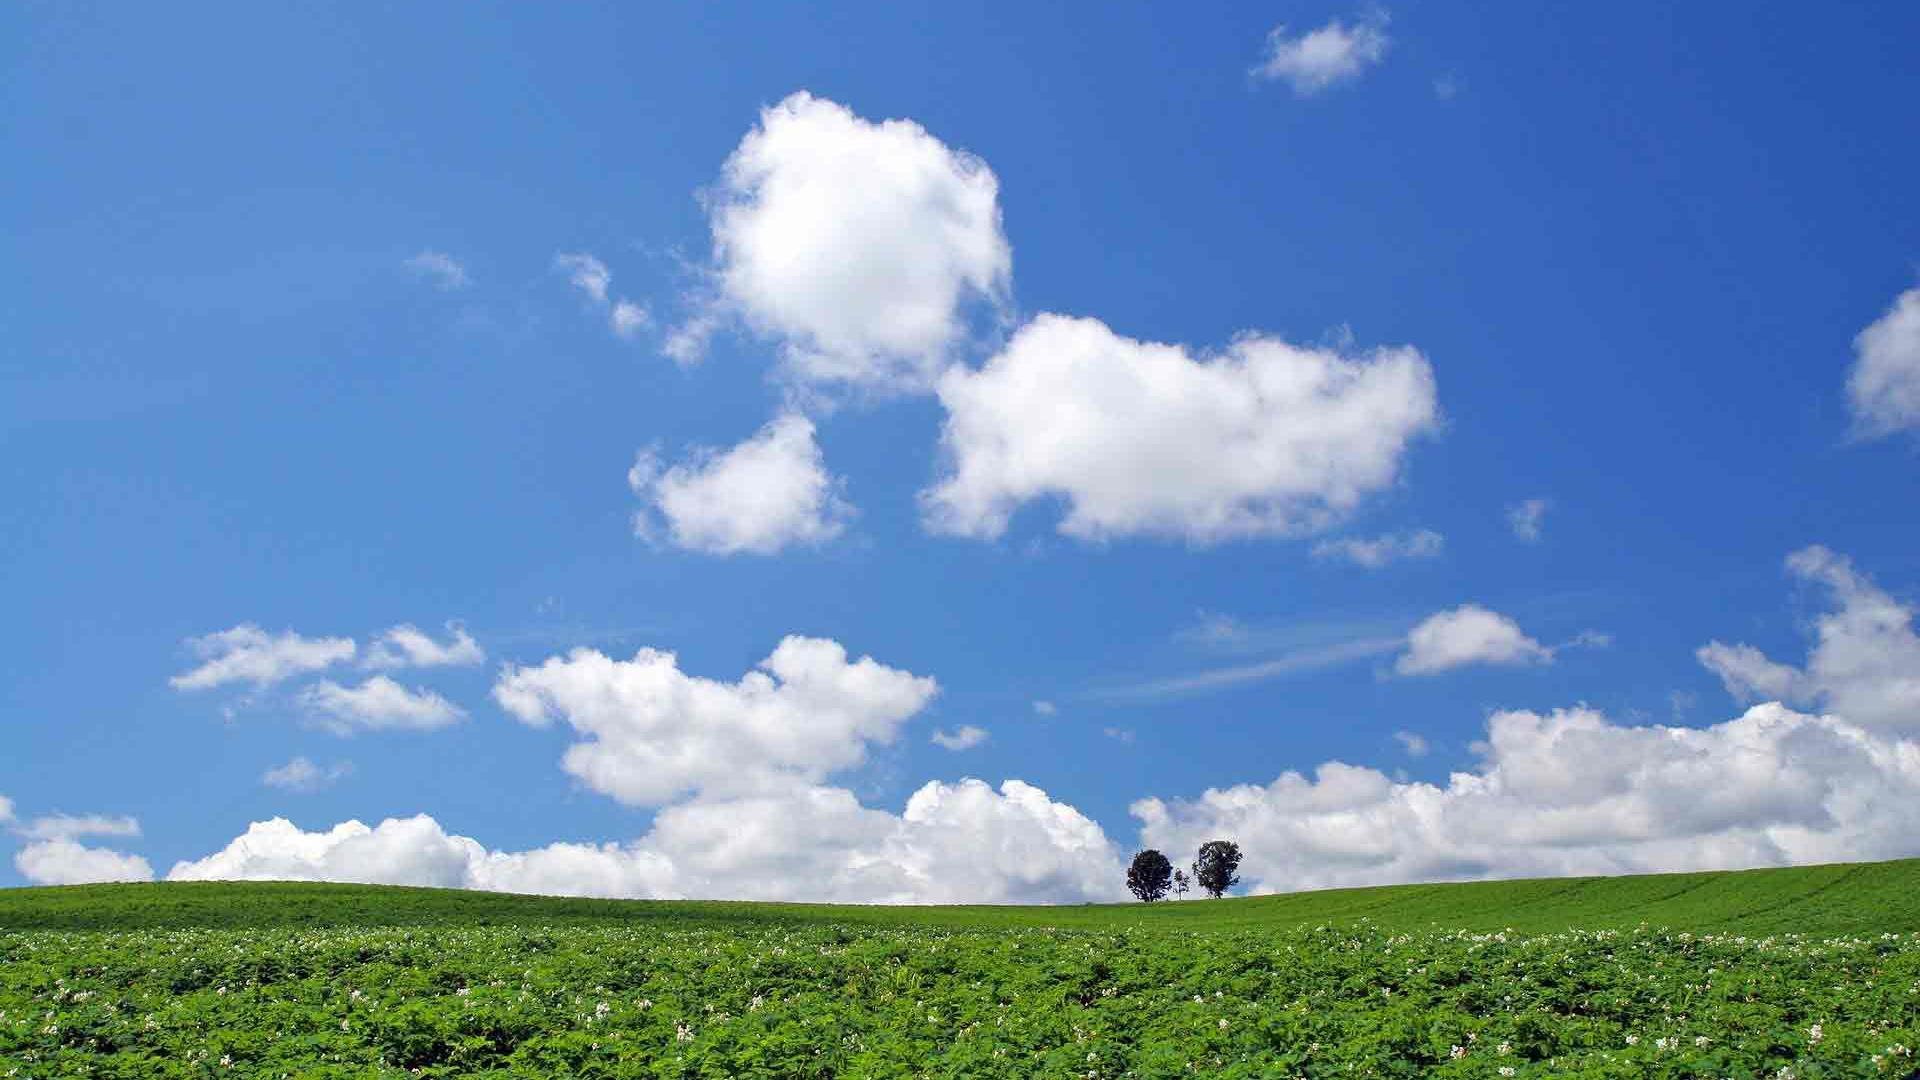 Hd White Clouds In The Blue Sky Scenic Desktop Background